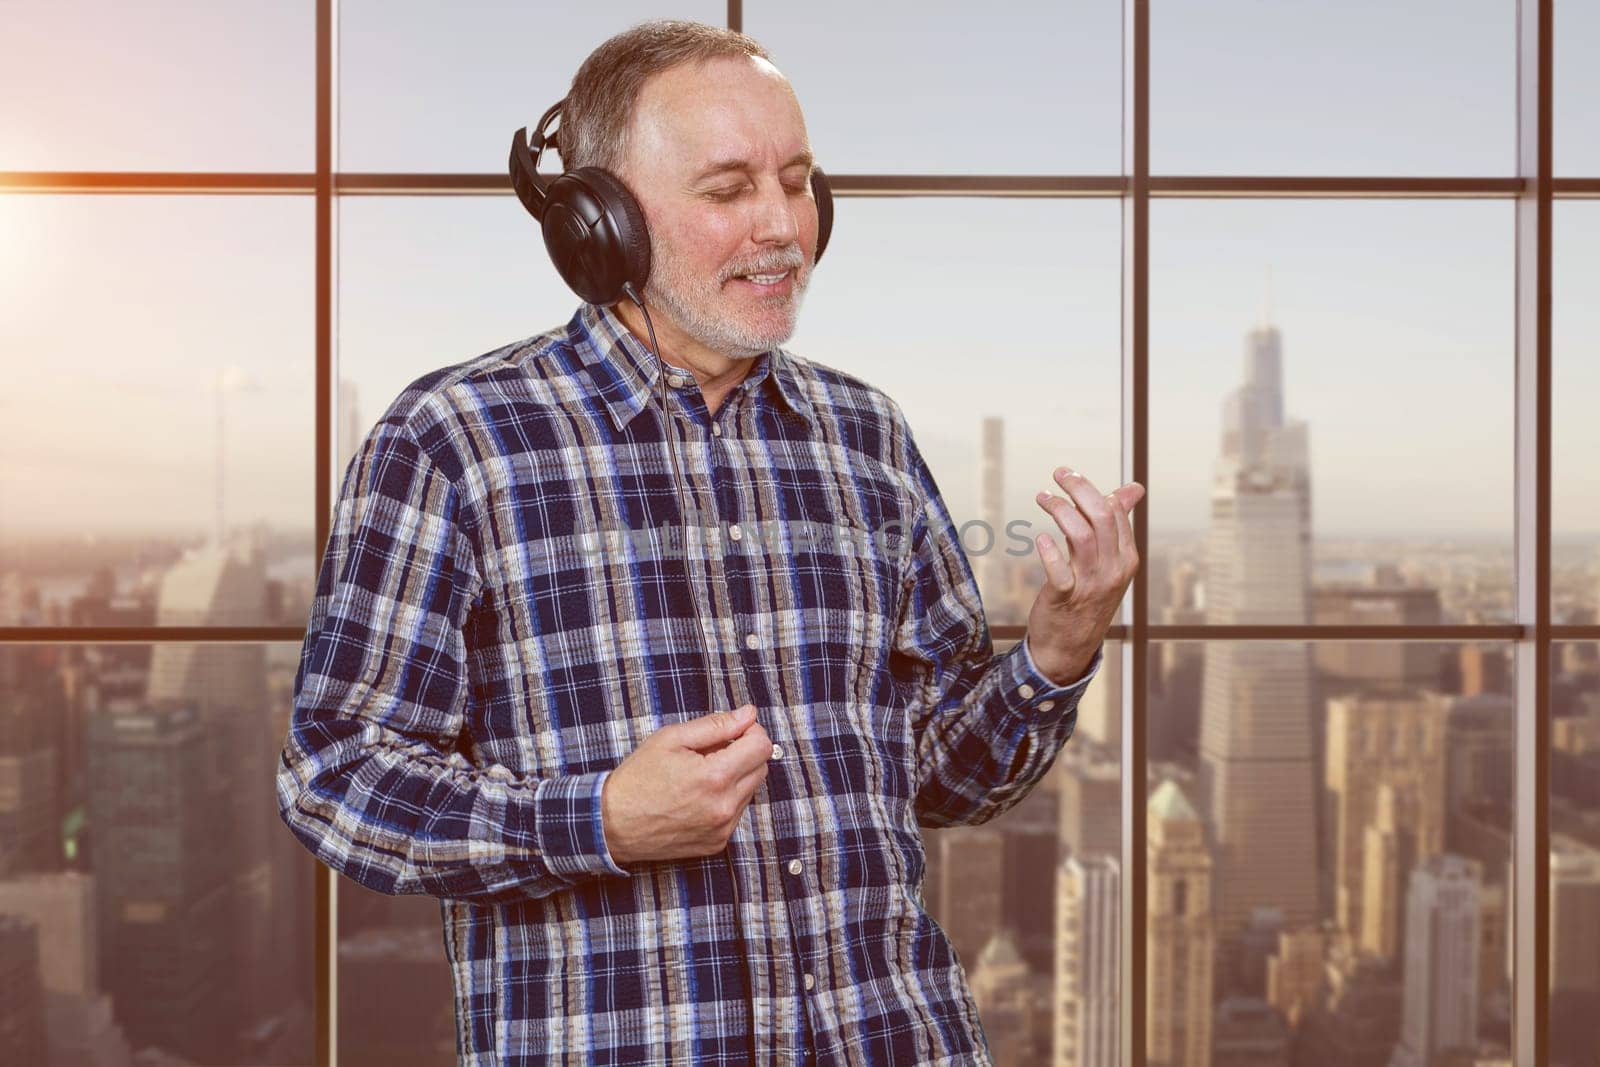 Mature man listening to music in headphones and enjoying. Checkered window background with cityscape view.